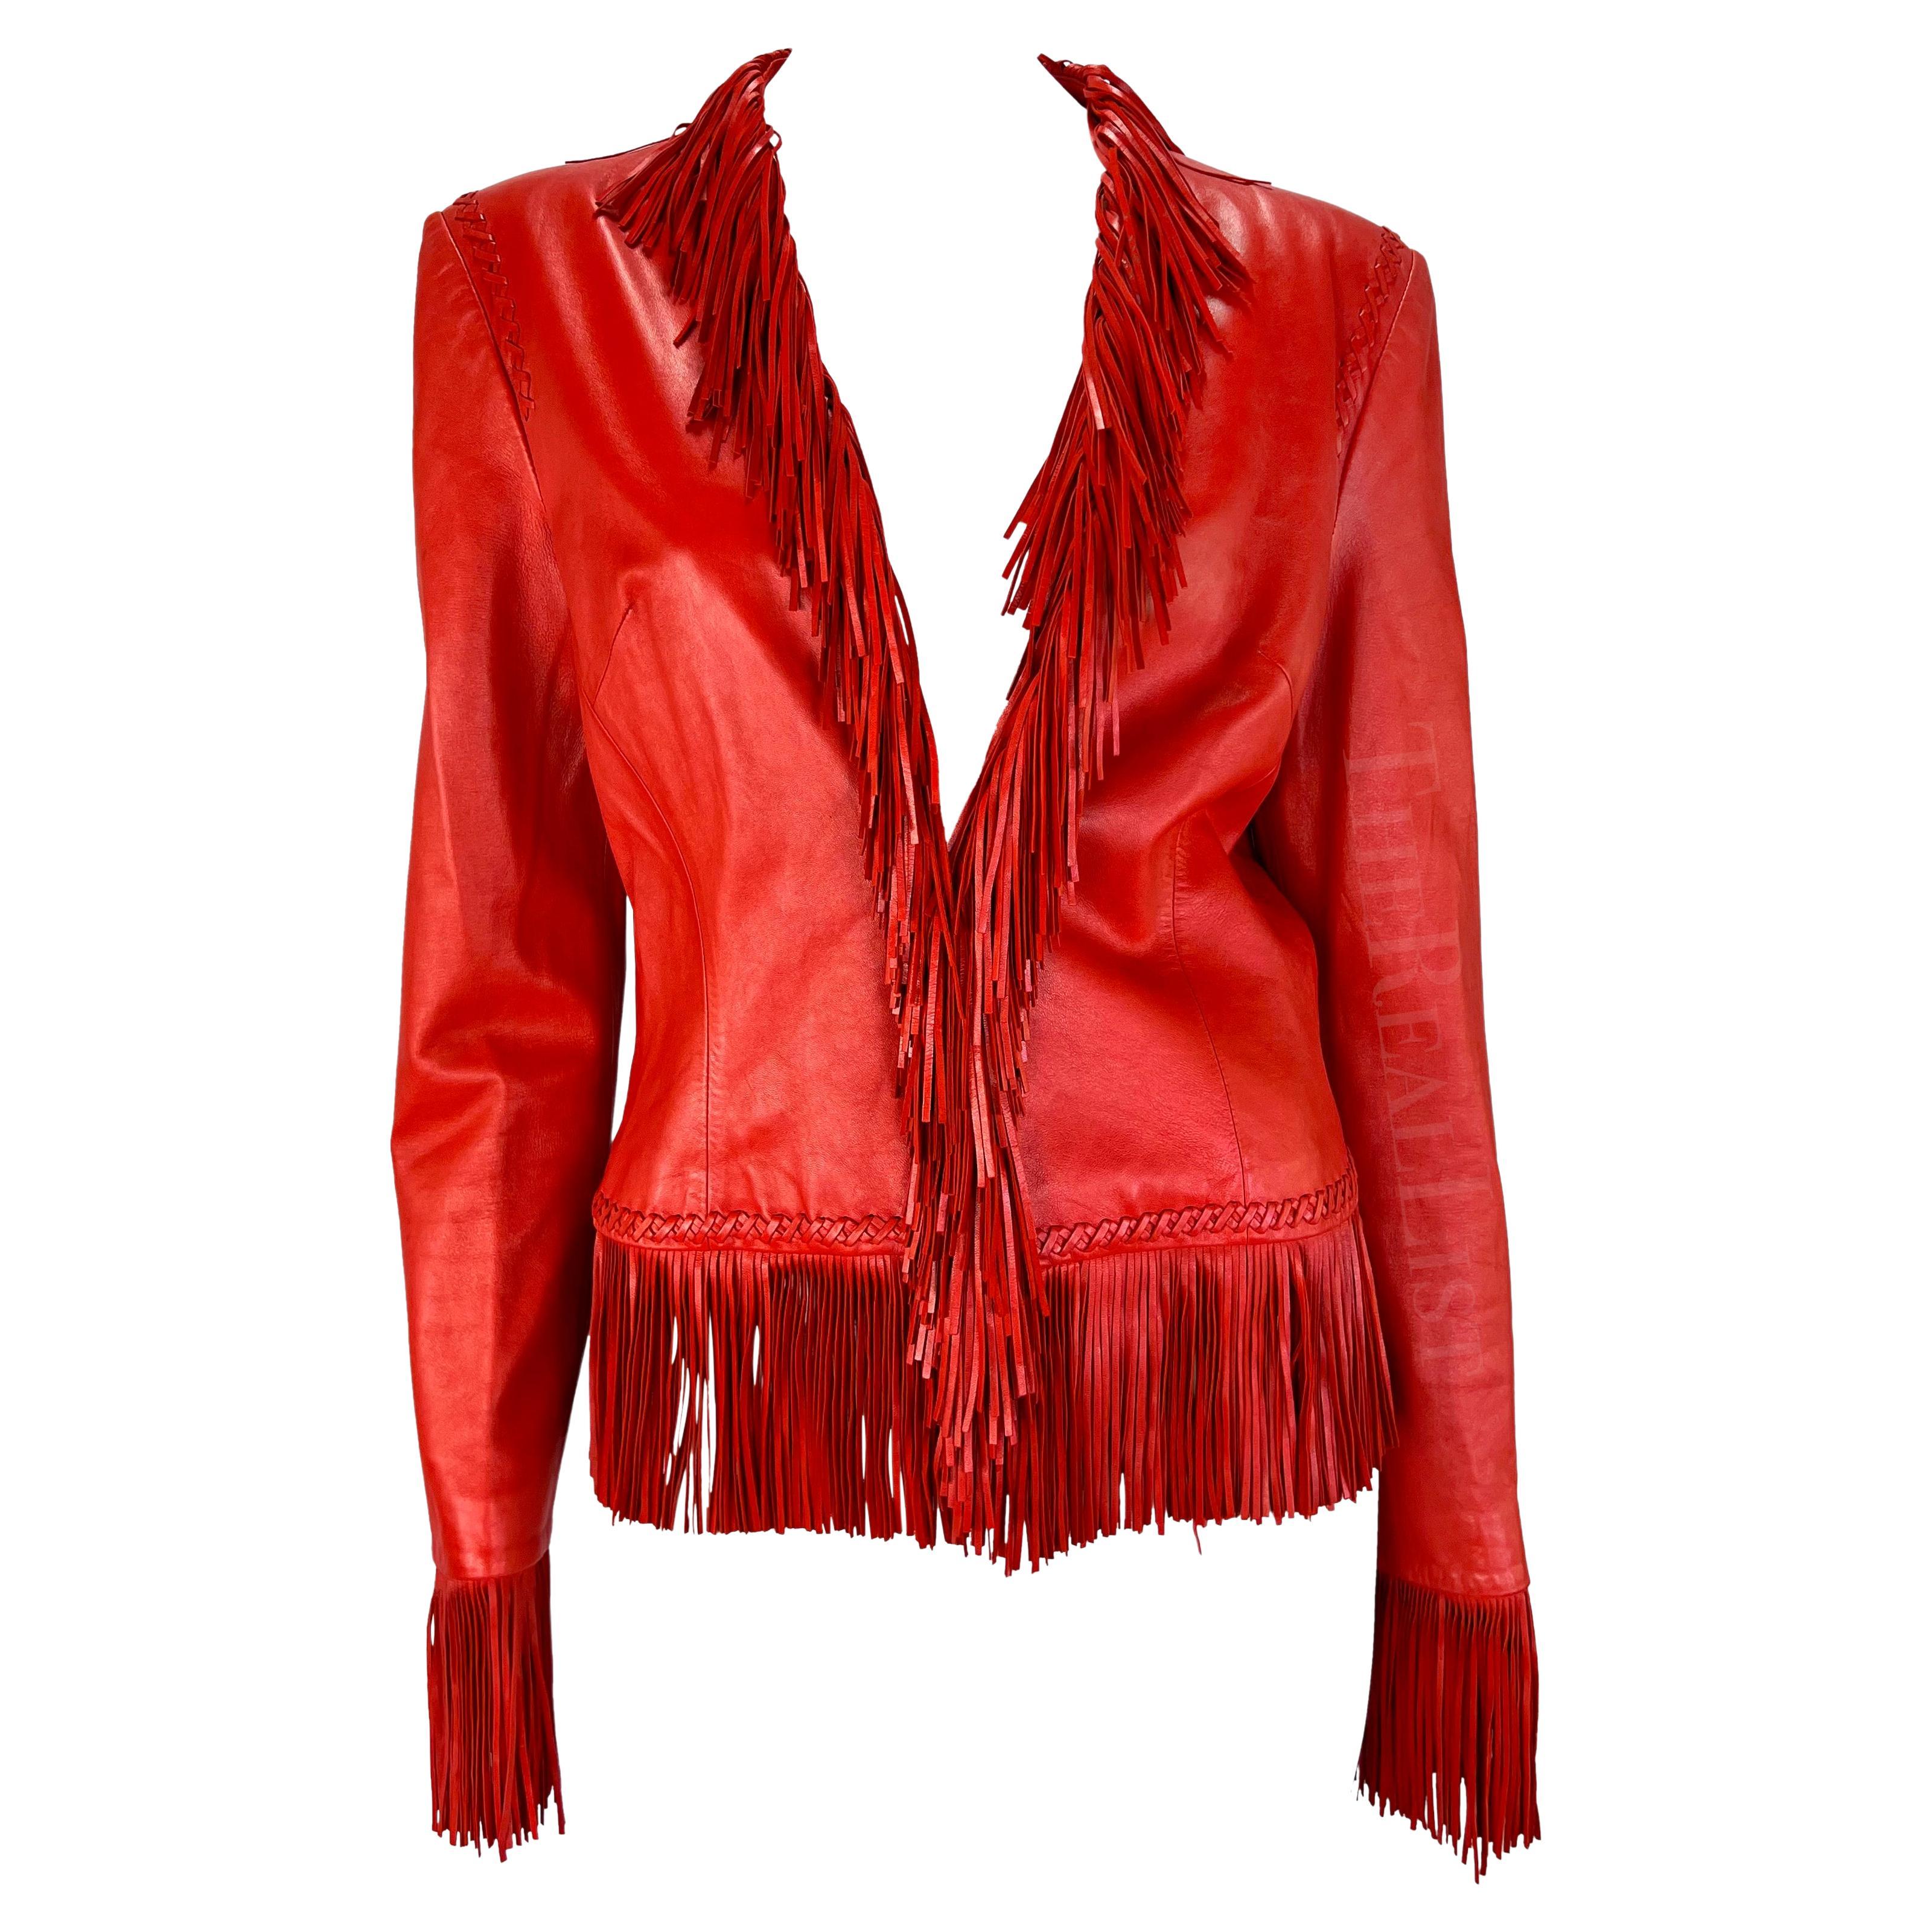 S/S 2002 Gianni Versace by Donatella Red Fringe Leather Jacket For Sale